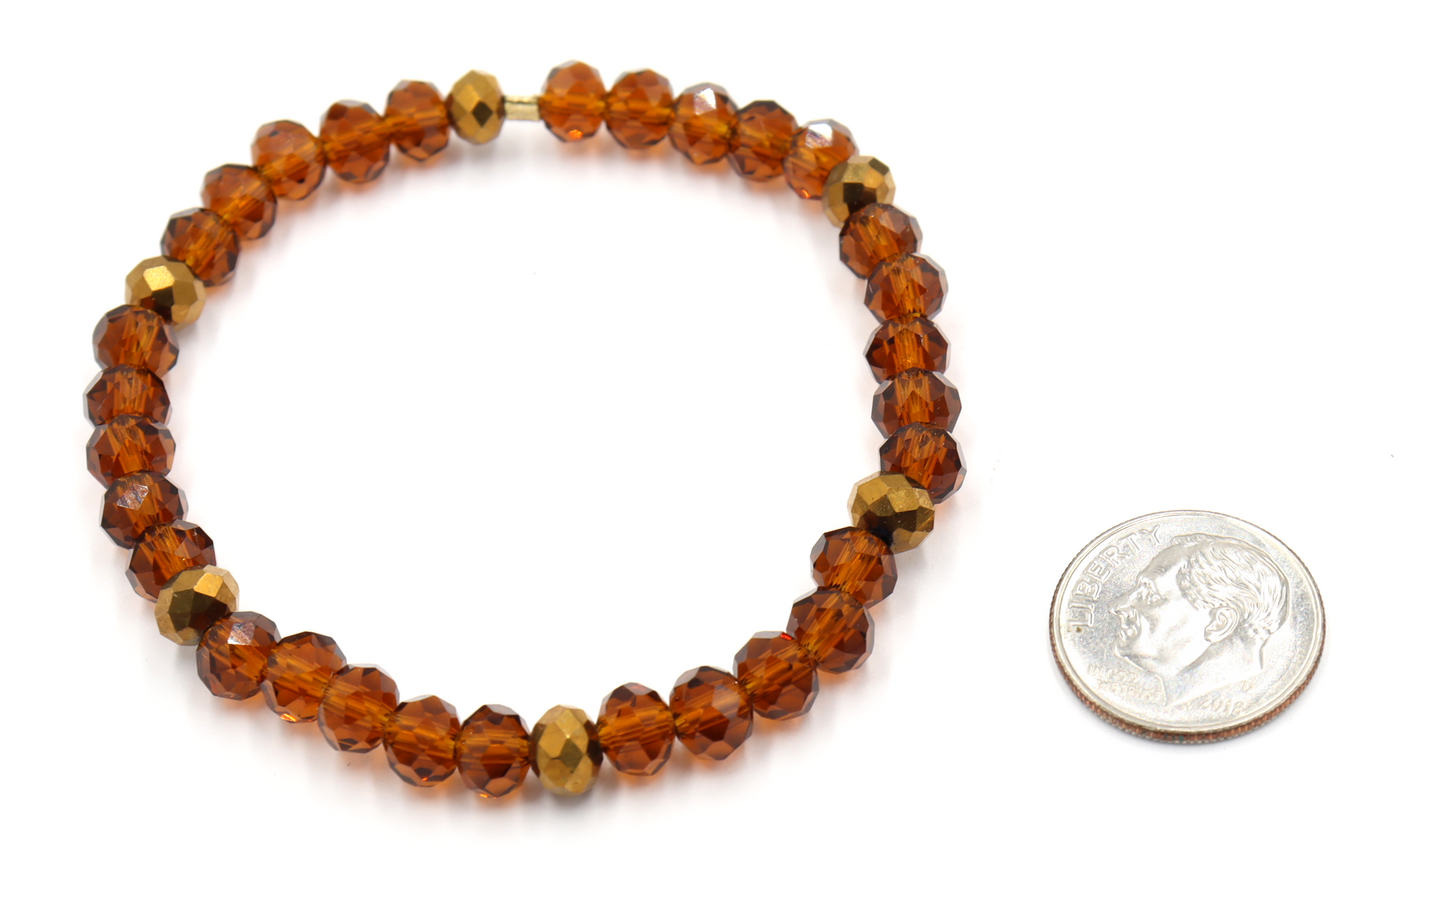 Golden Wheat Harvest - Gold and Brown Fall Autumn Glass Bead Stretch Bracelet by Monkey's Mojo